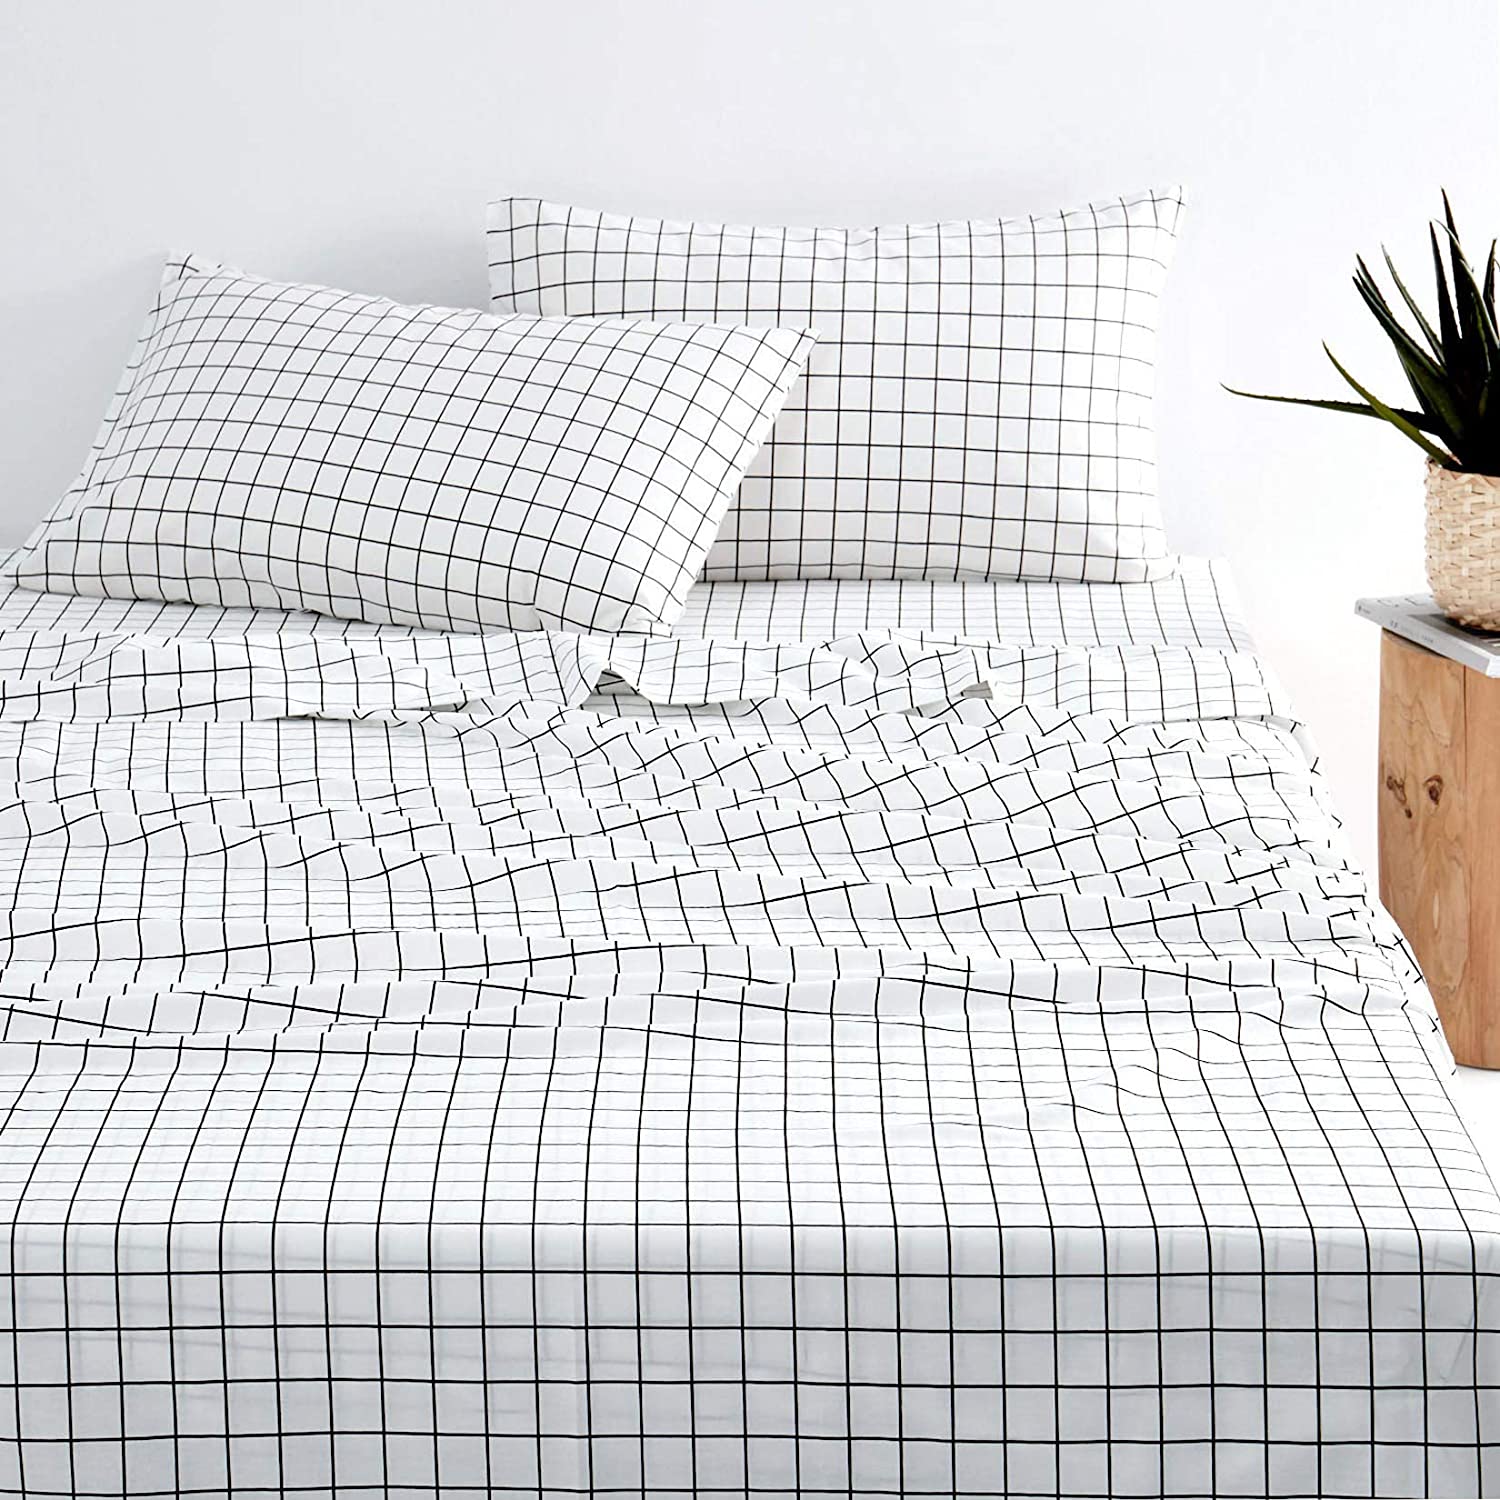 100% Washed Cotton Bedding with Zipper Closure White with Black Grid Geometric Pattern Printed White Grid Duvet Cover Set Wake In Cloud 3pcs, Queen Size 